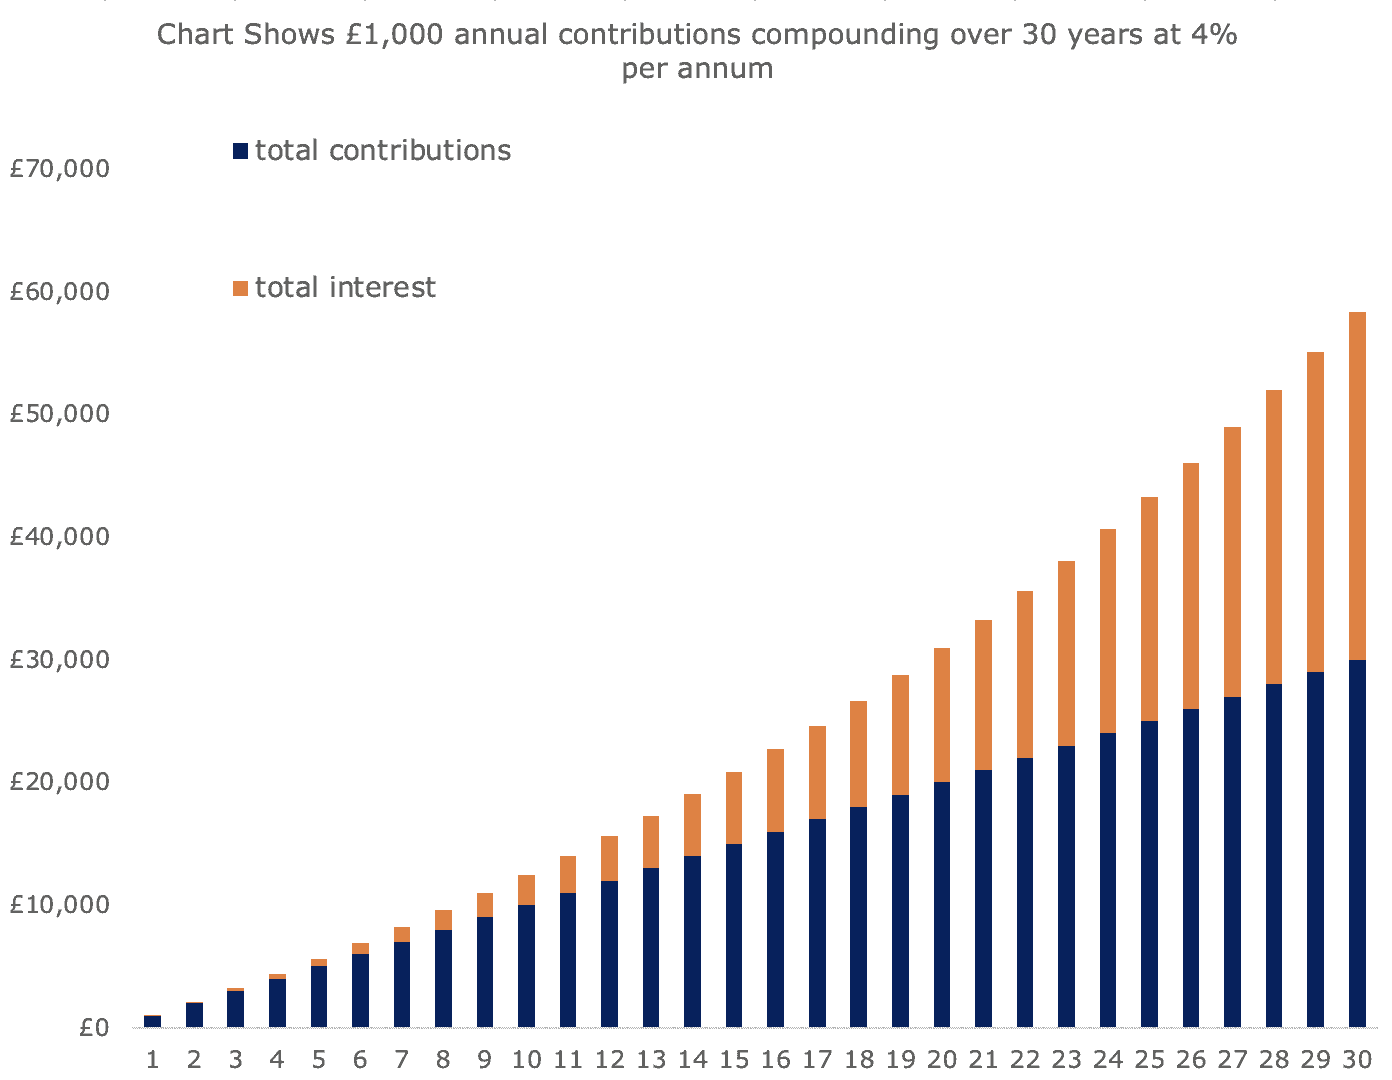 Chart showing how annual £1,000 contributions compounding at 3% per annum over 30 years